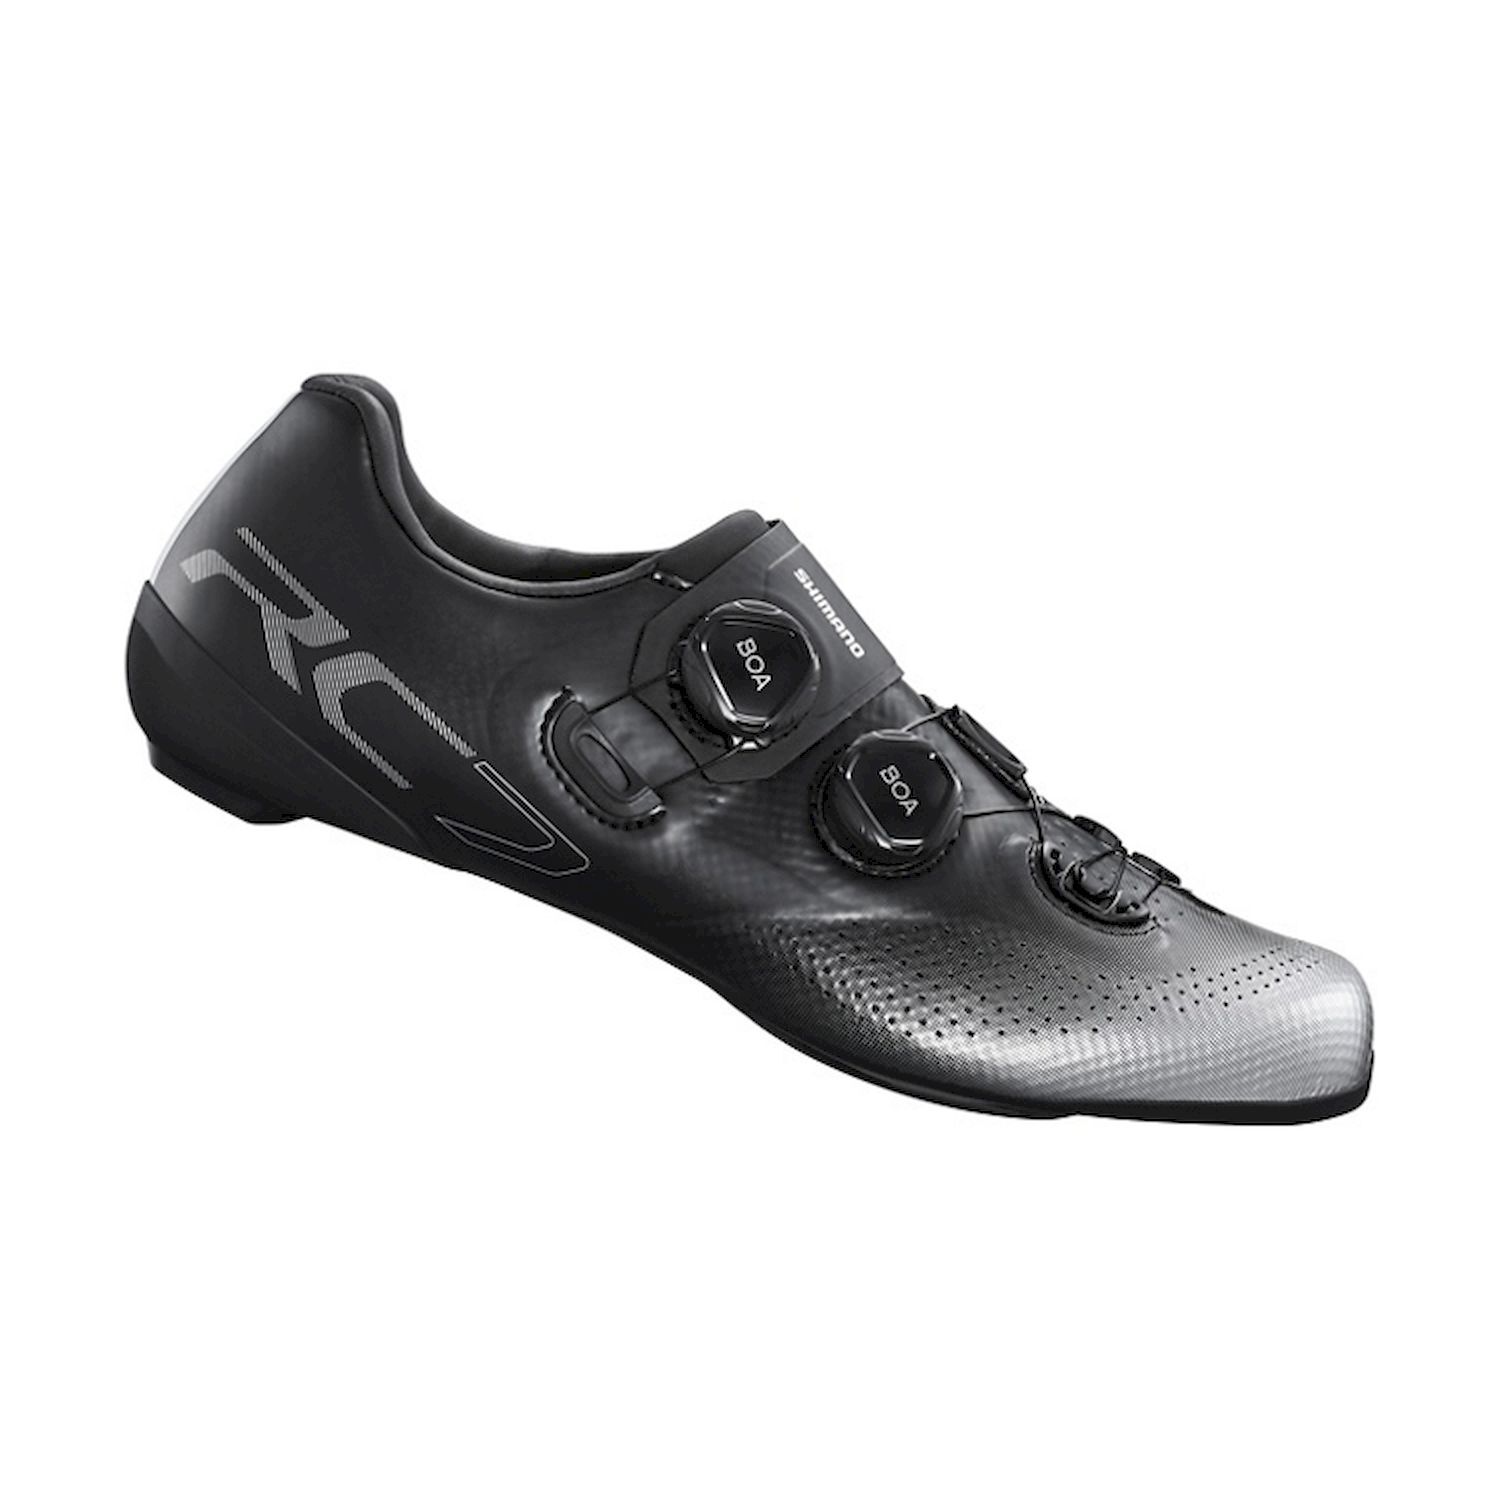 Shimano Route RC702 Large - Cycling shoes - Men's